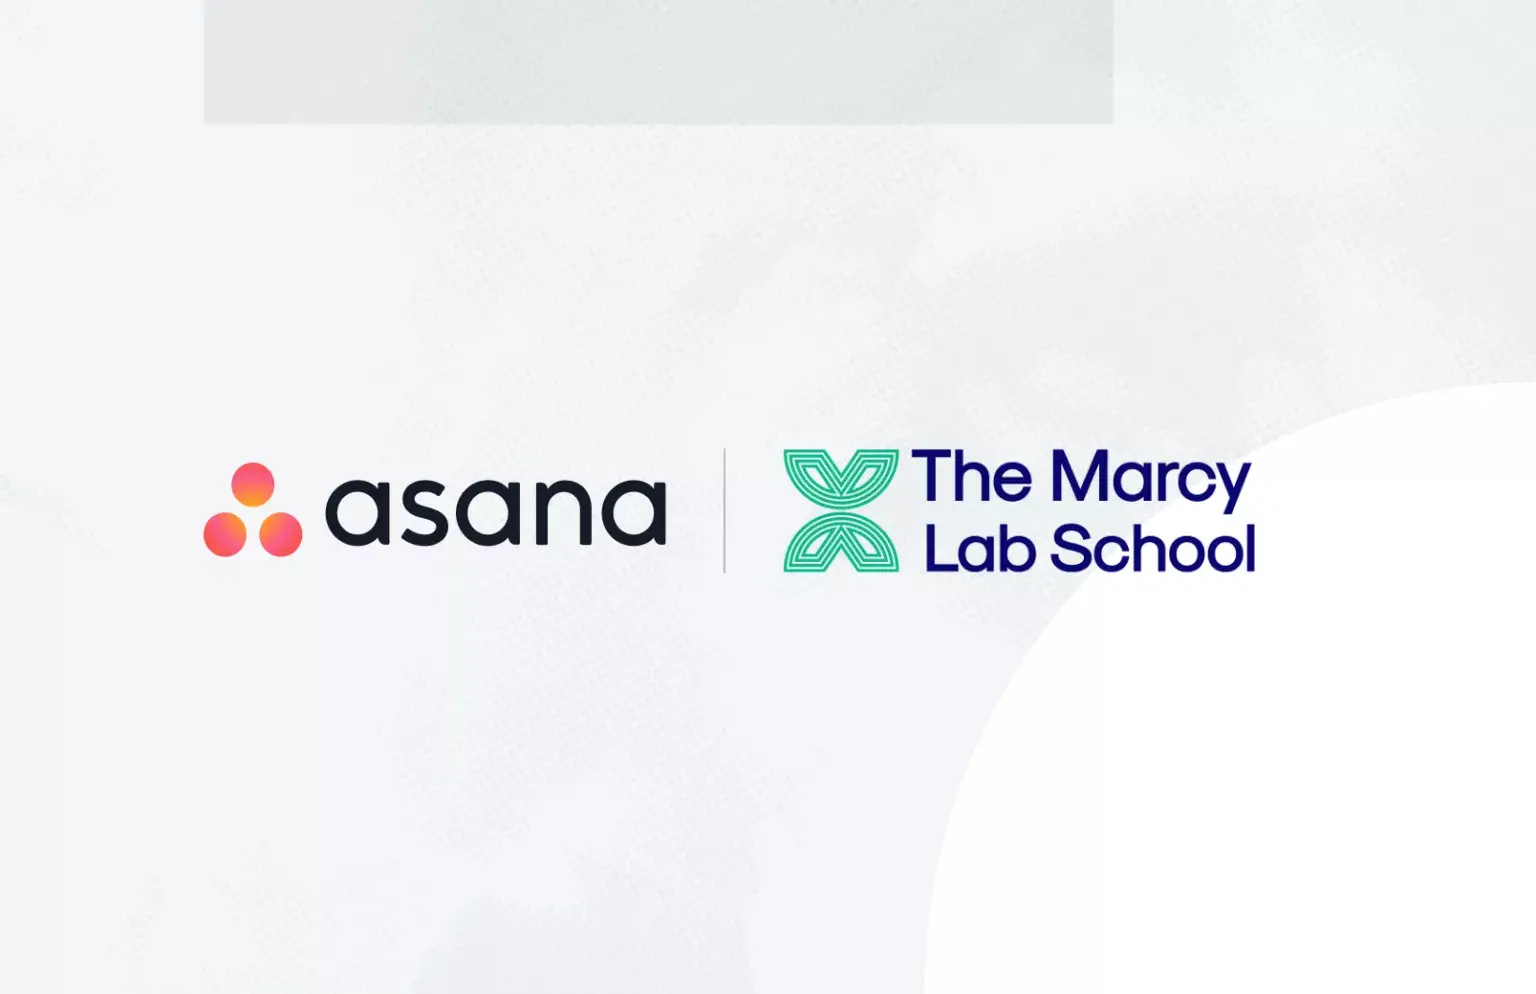 Asana partners with marcy lab school article banner image